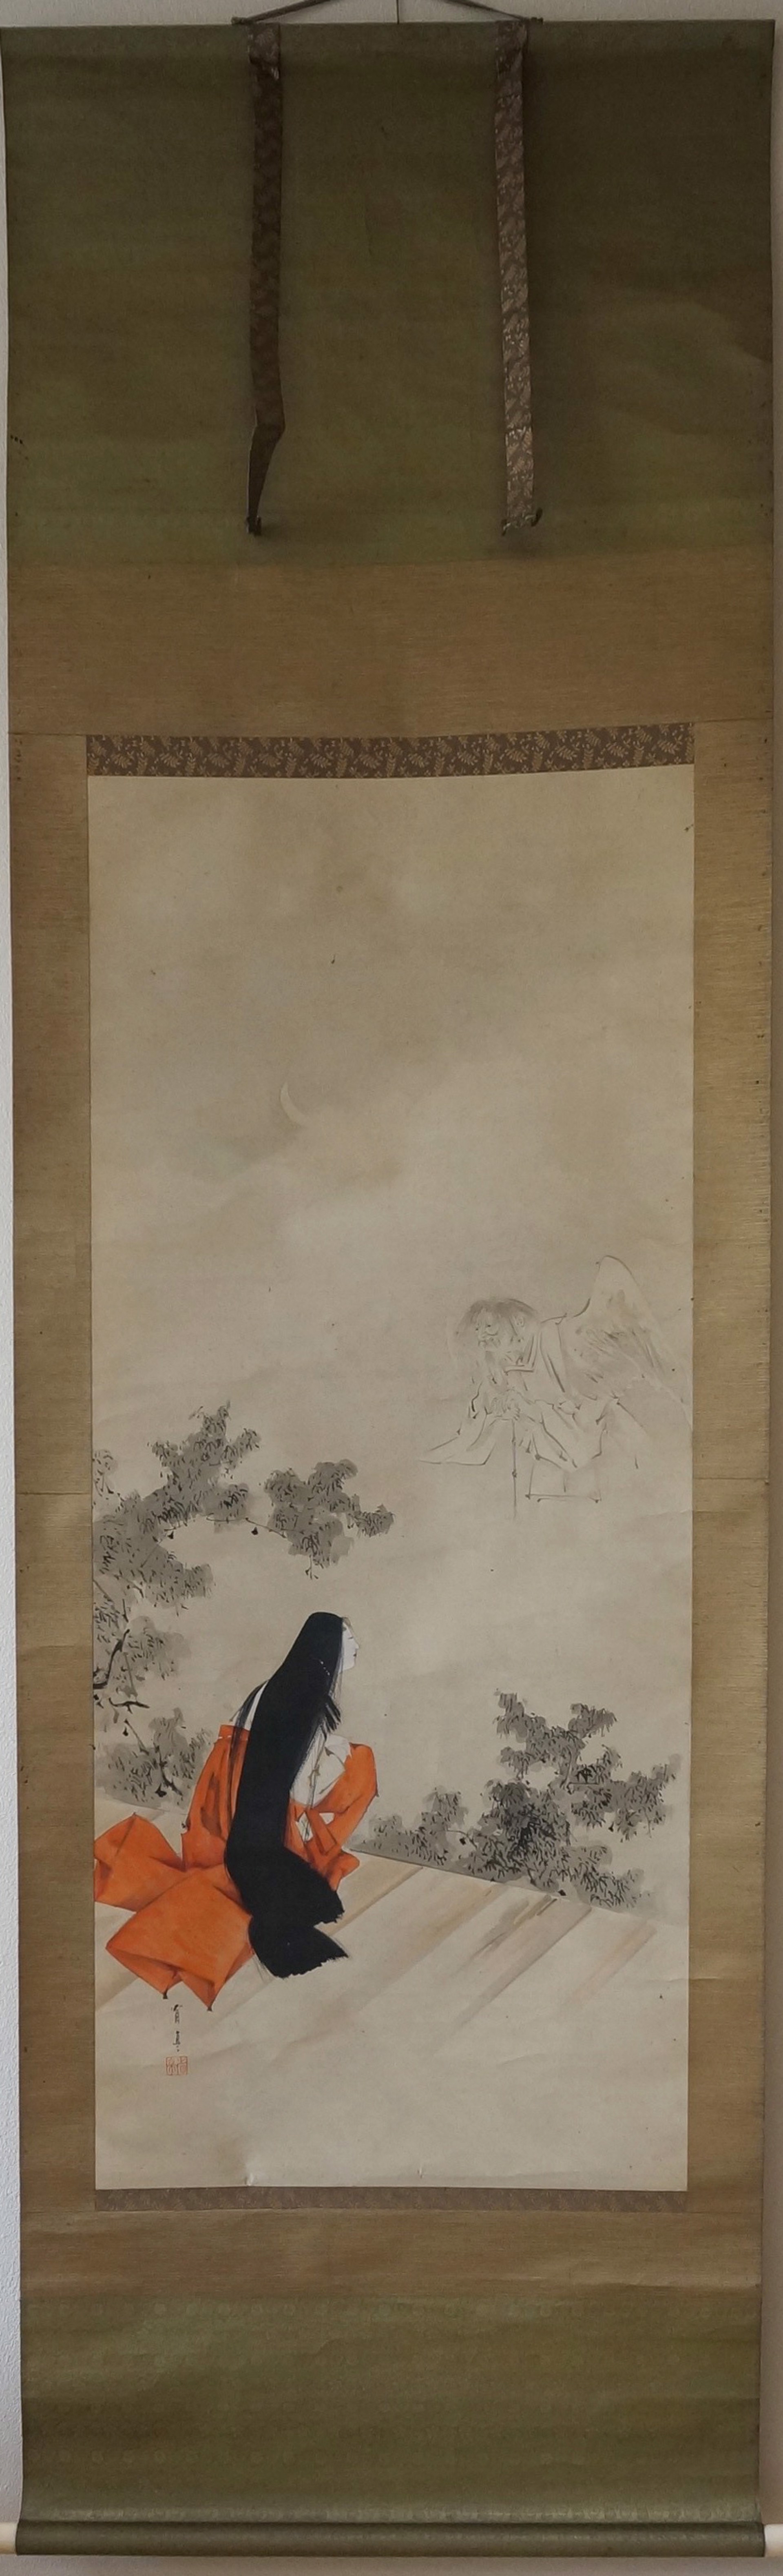 Kanjo Tenkami Jin (A Court Lady Seeing a Spirit in the Sky) by Watanabe Seitei